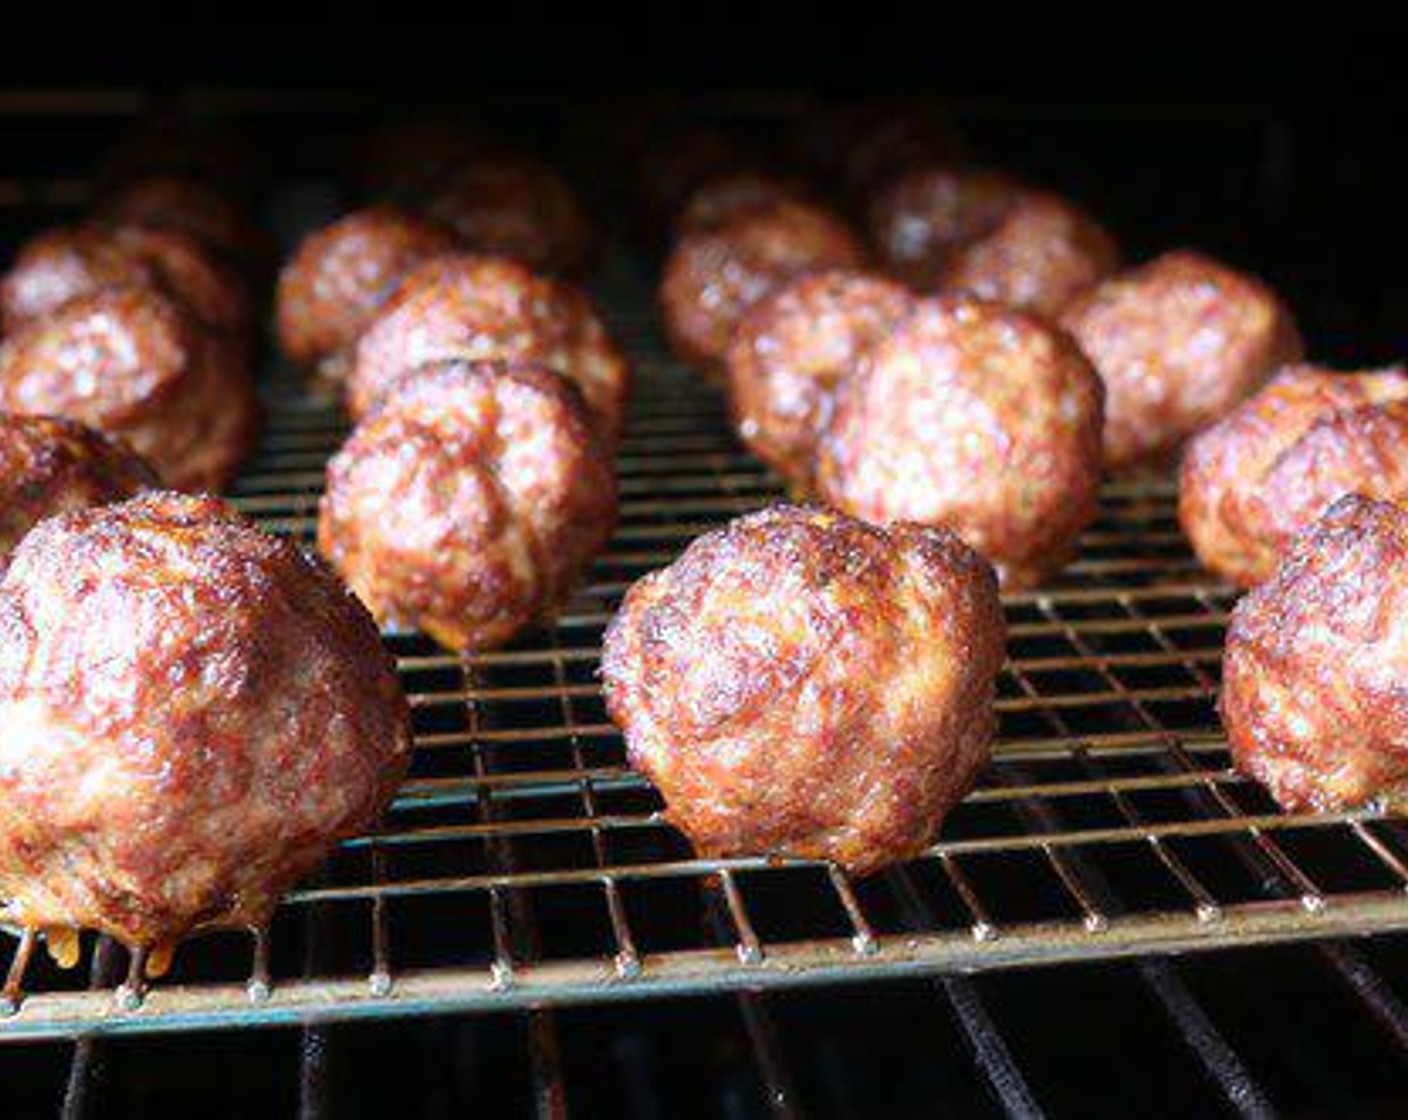 step 2 Place the meatballs on a pork rack sprayed with non-stick cooking spray. You can smoke your meatballs on any grill or smoker. You want to hold the temps at 275 degrees F (140 degrees C) with a little light smoke. Allow the meatballs to smoke for 35 - 45 minutes  - or until the meatballs hit an internal temp around 160-165 degrees Fahrenheit (71-73 degrees C).